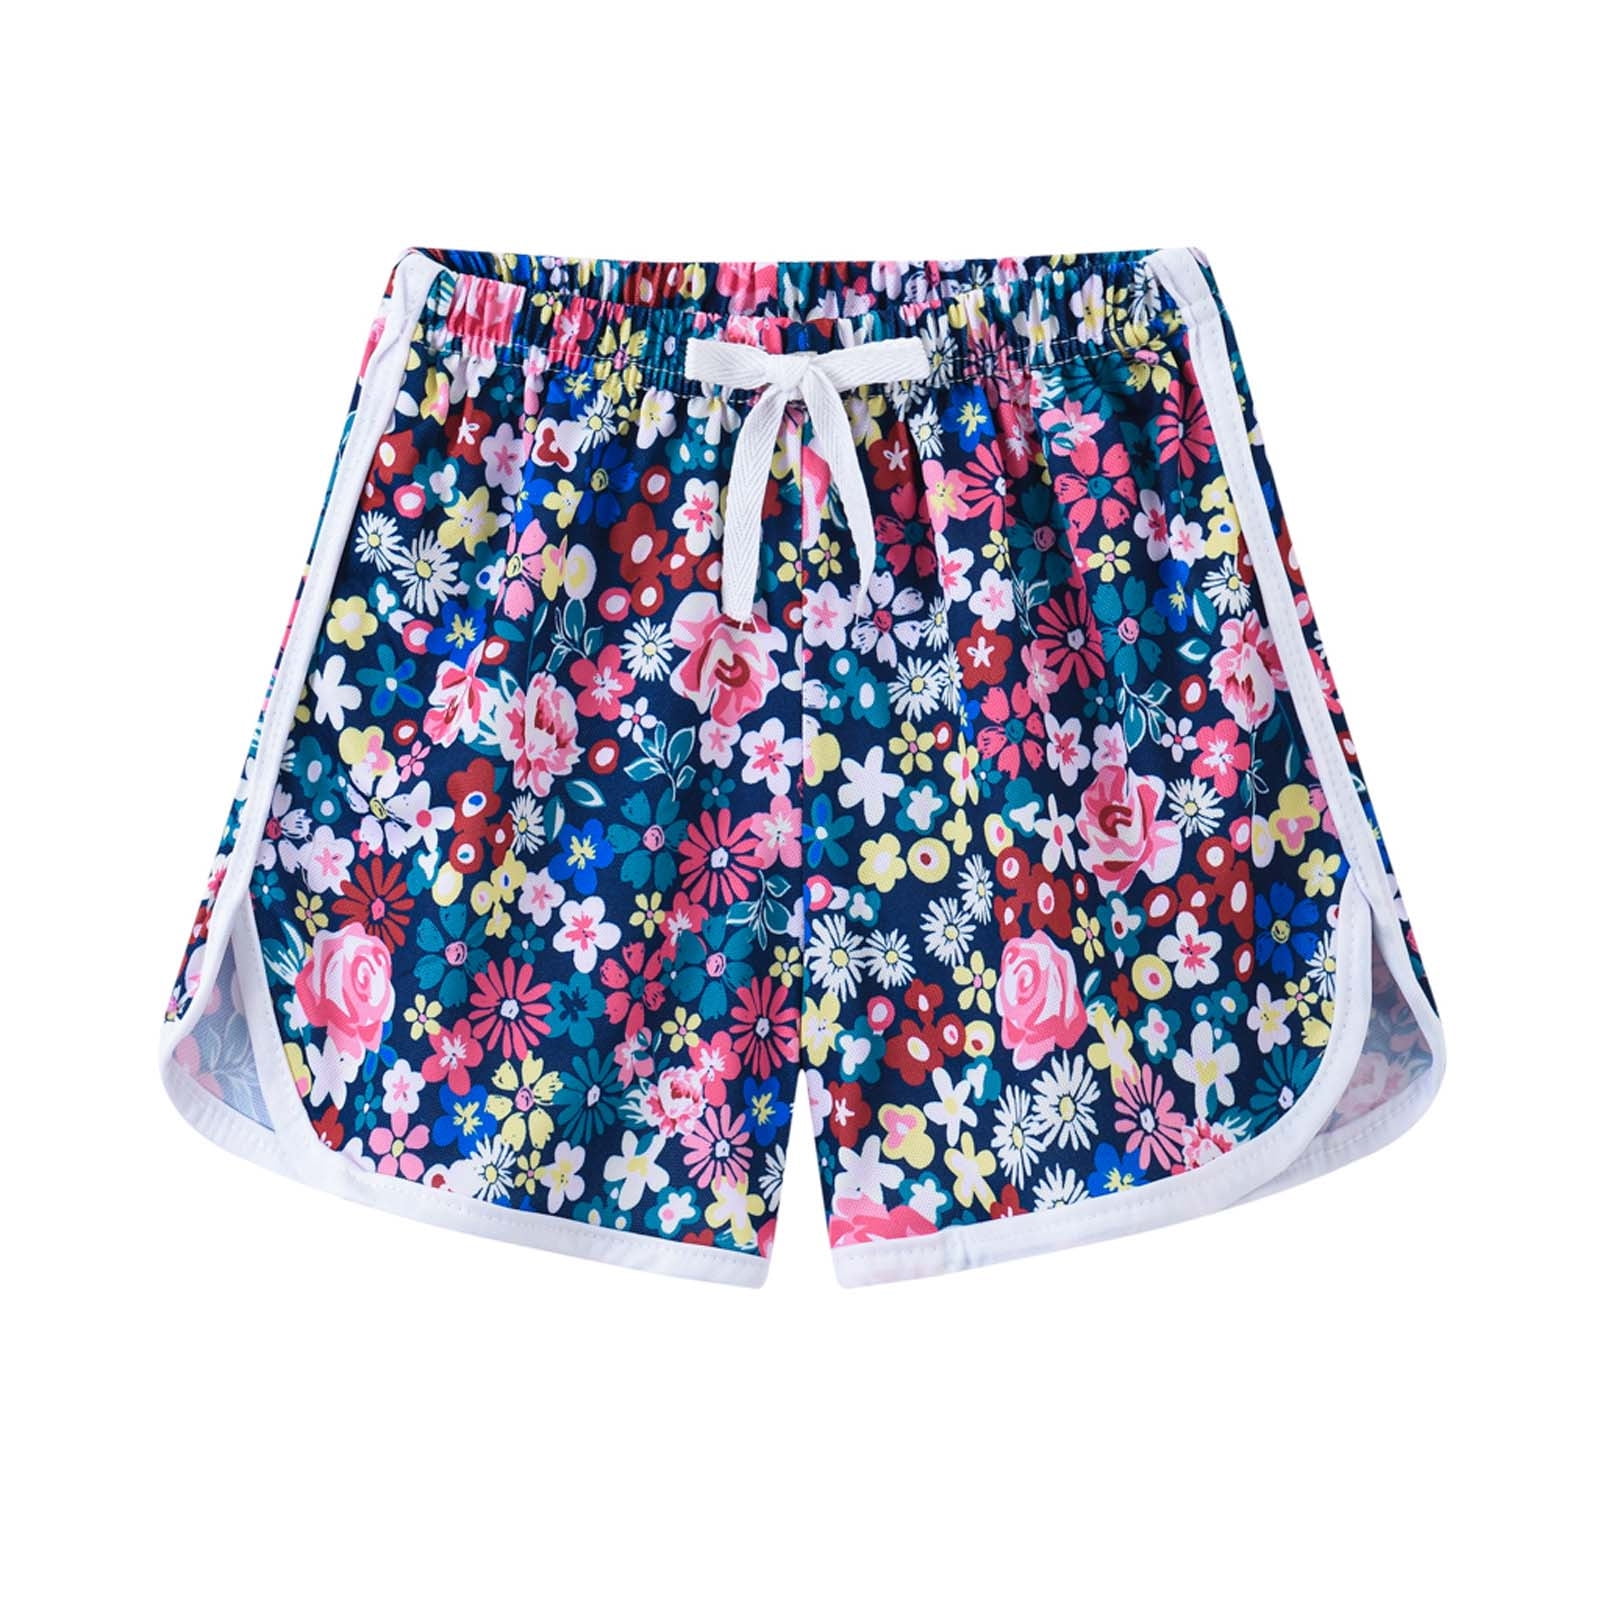 Funicet Toddler Shorts Summer Children's Casual Sports Printed Shorts ...